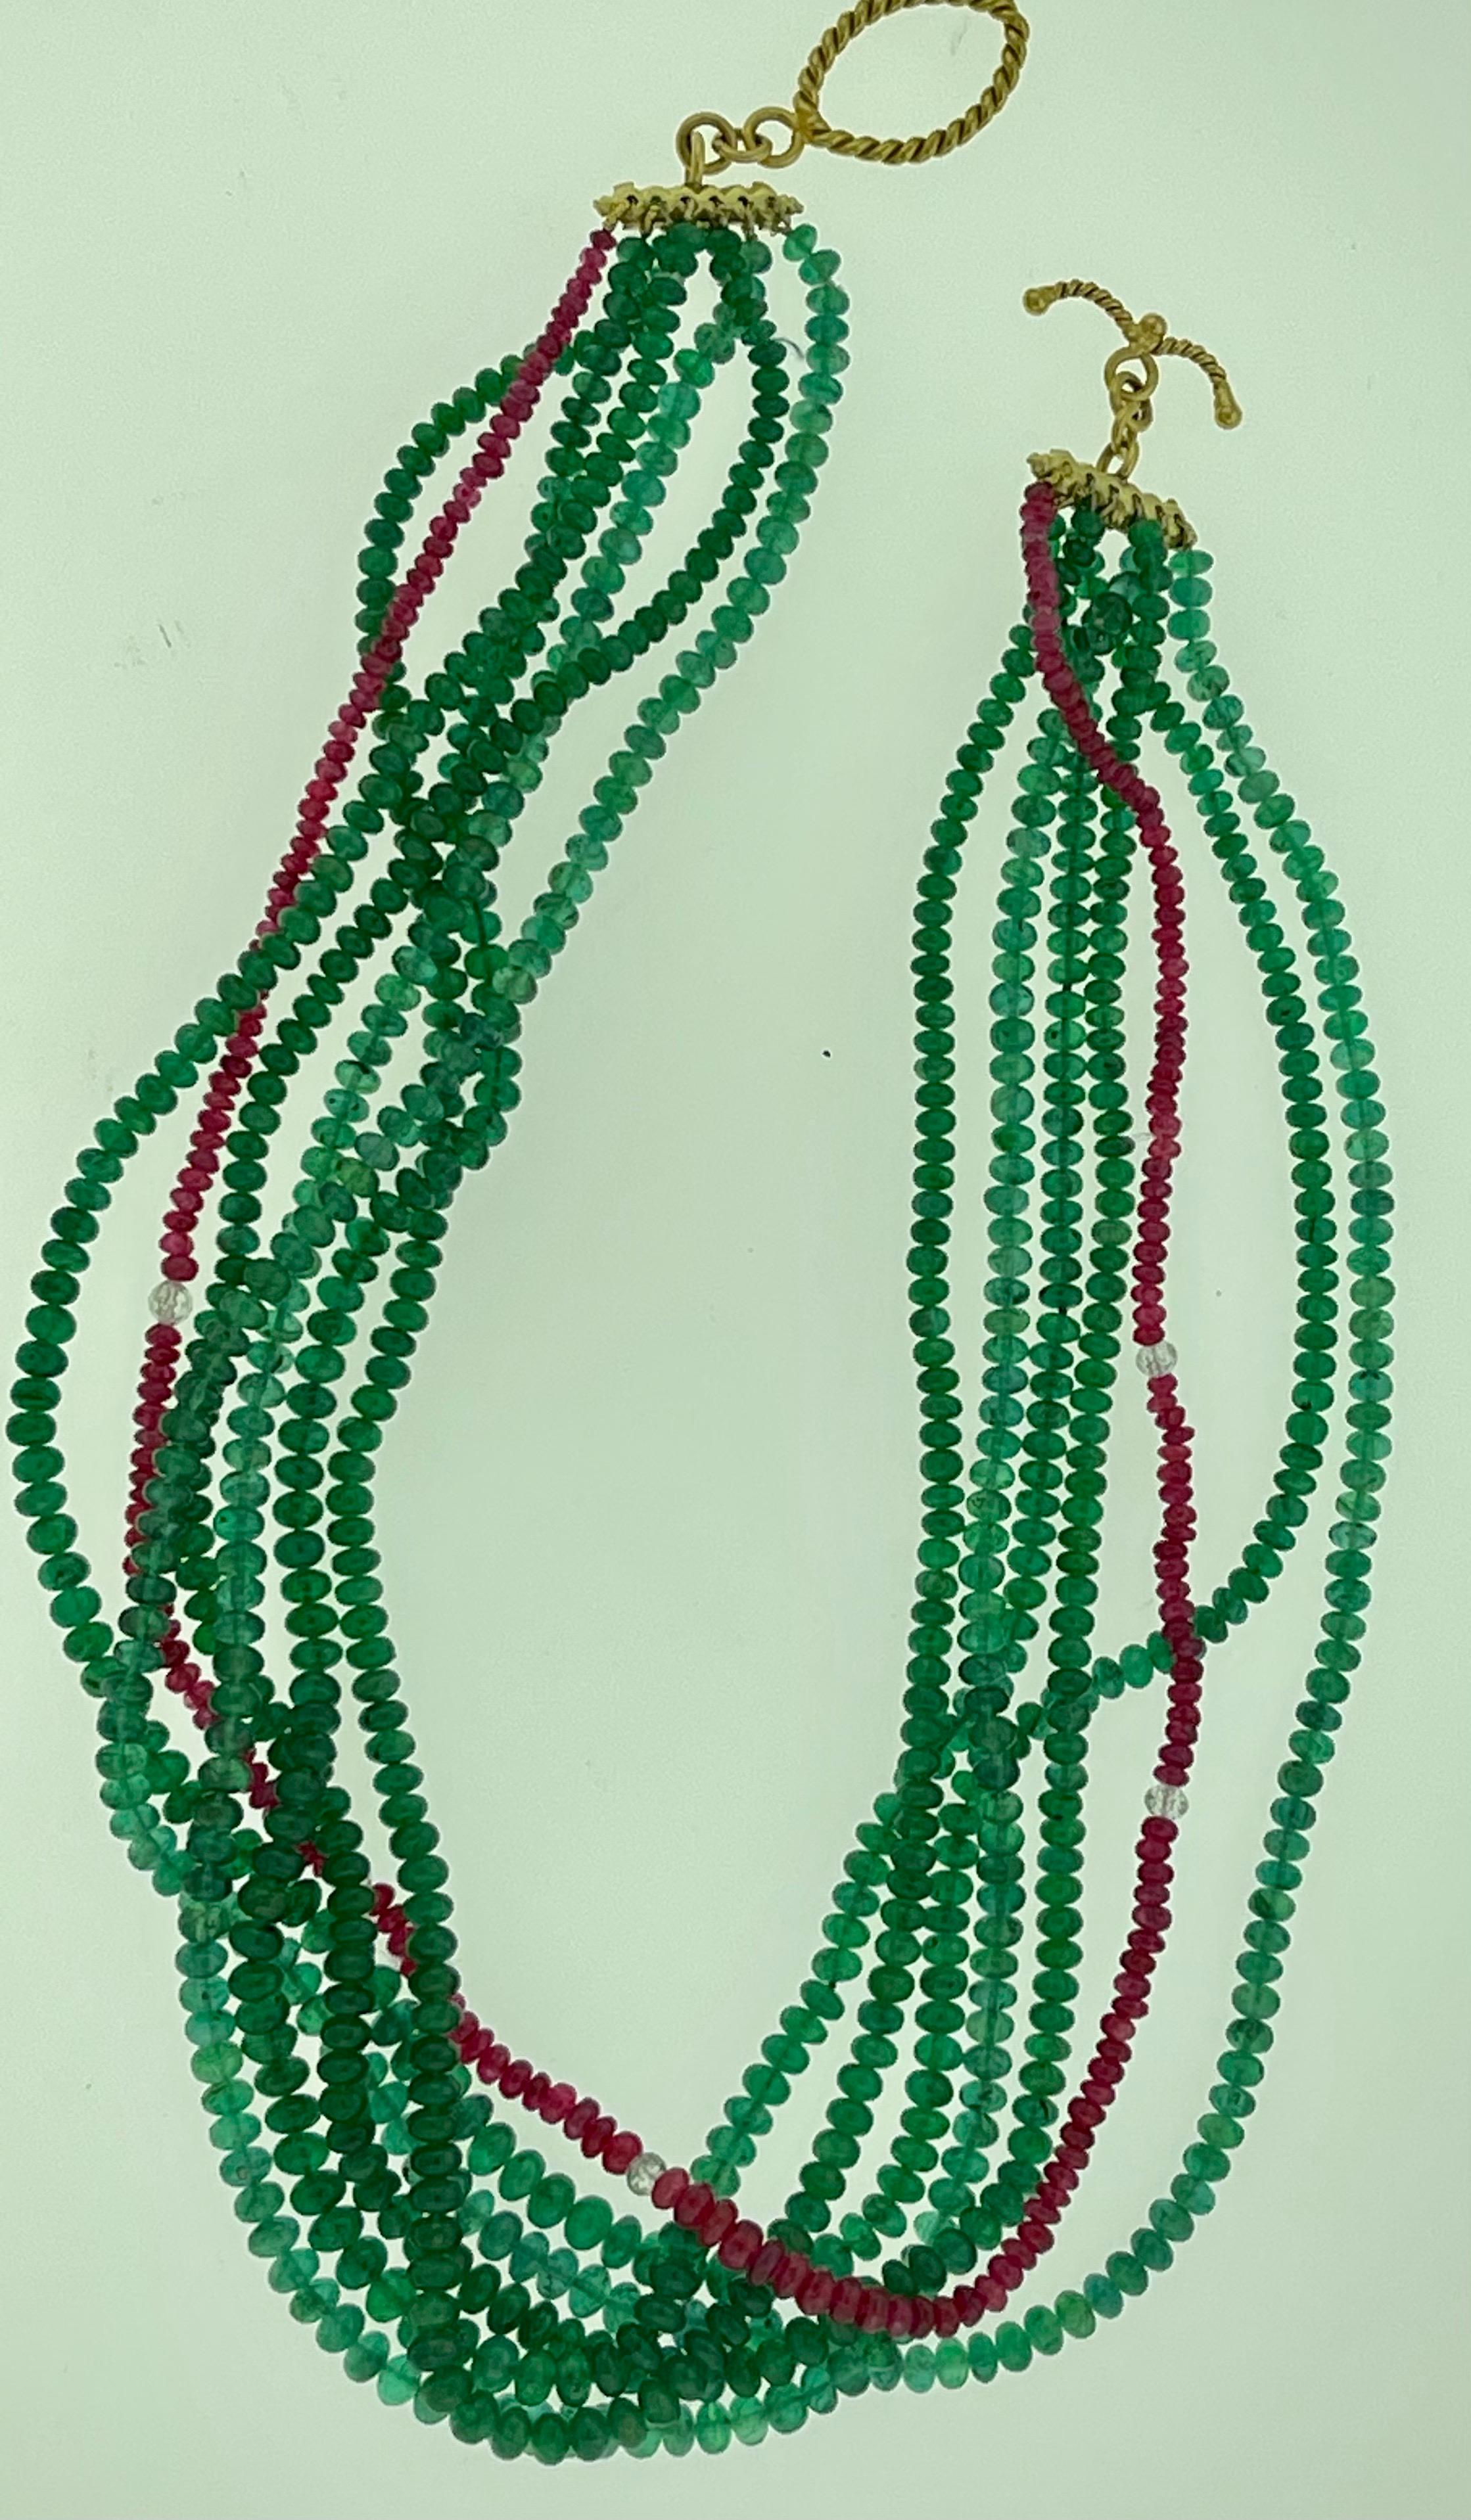 360 Carat Emerald, Burma Ruby and Diamond Beads Necklace 18 Karat Yellow Gold In Excellent Condition For Sale In New York, NY